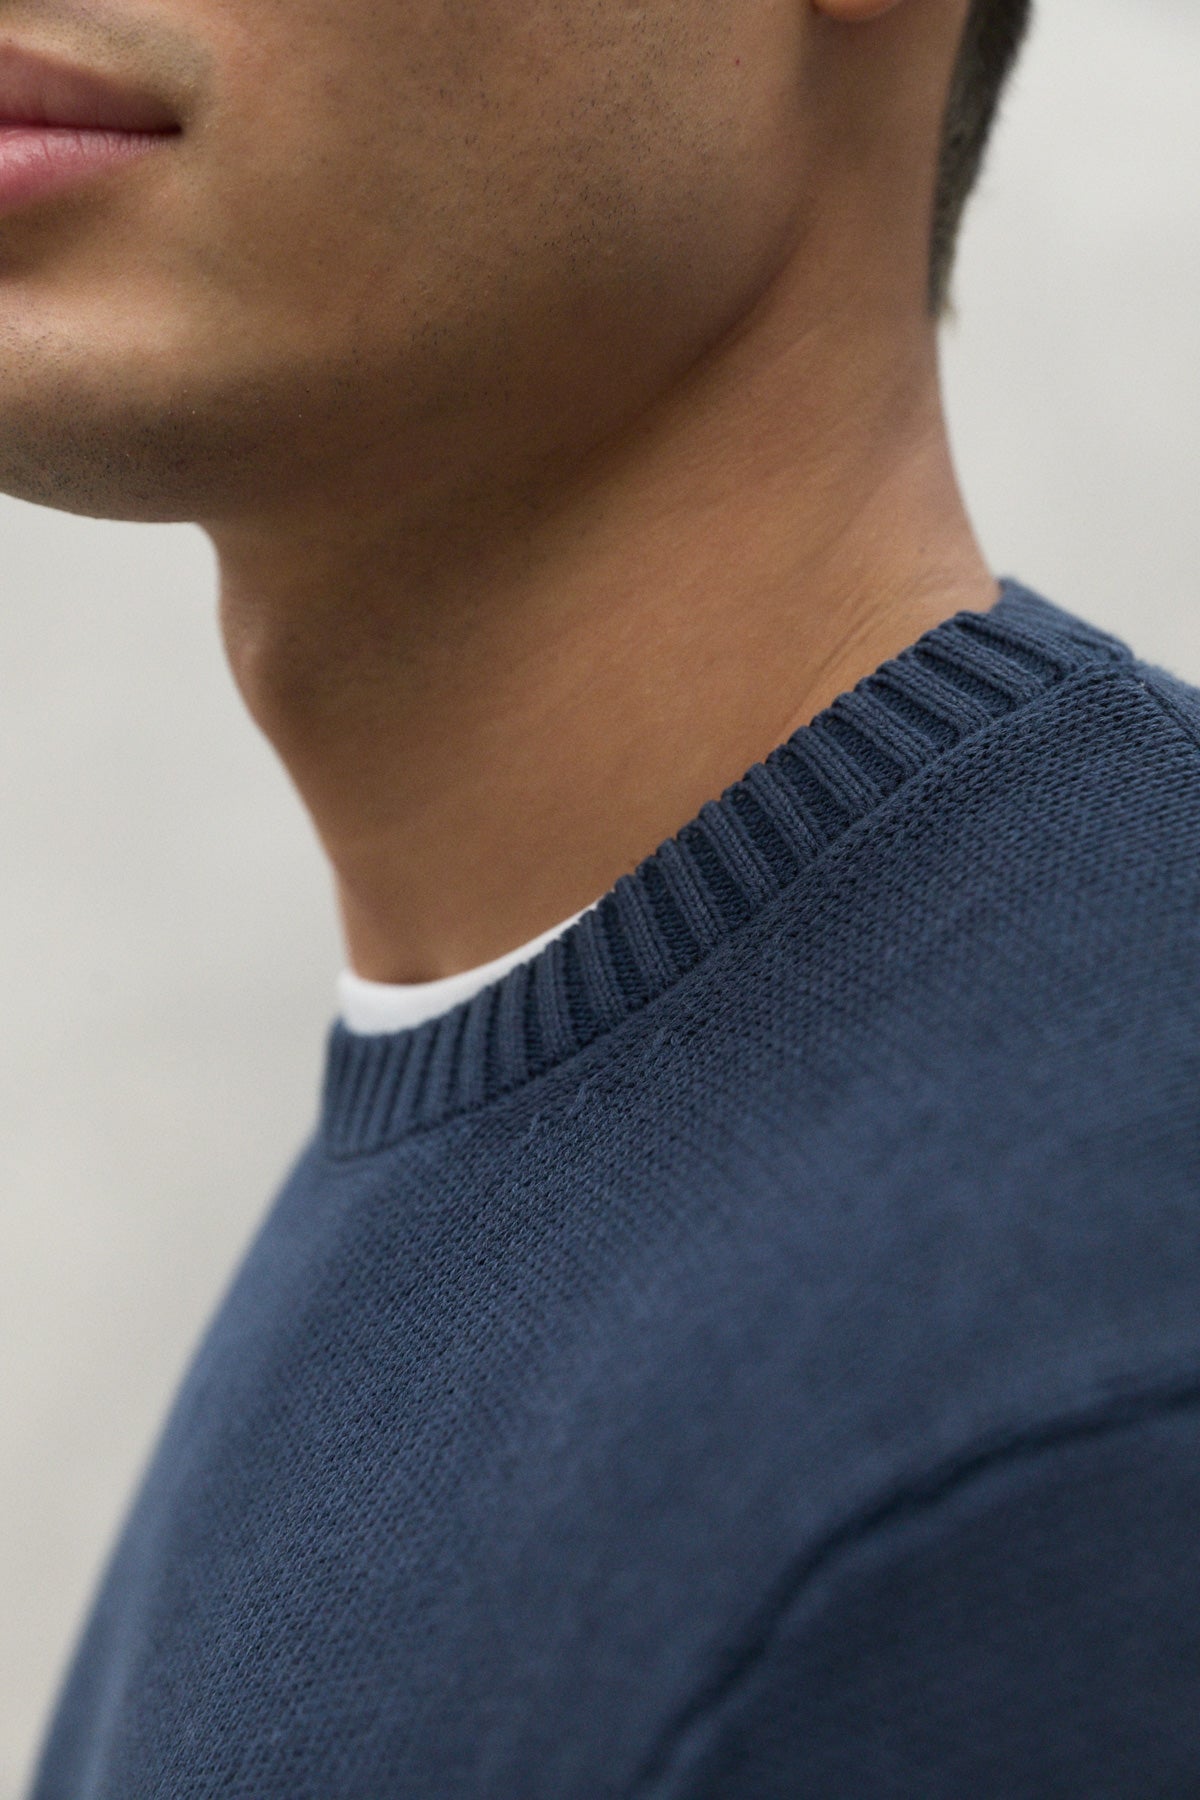 NAVY BLUE TAIL KNITTED SWEATER